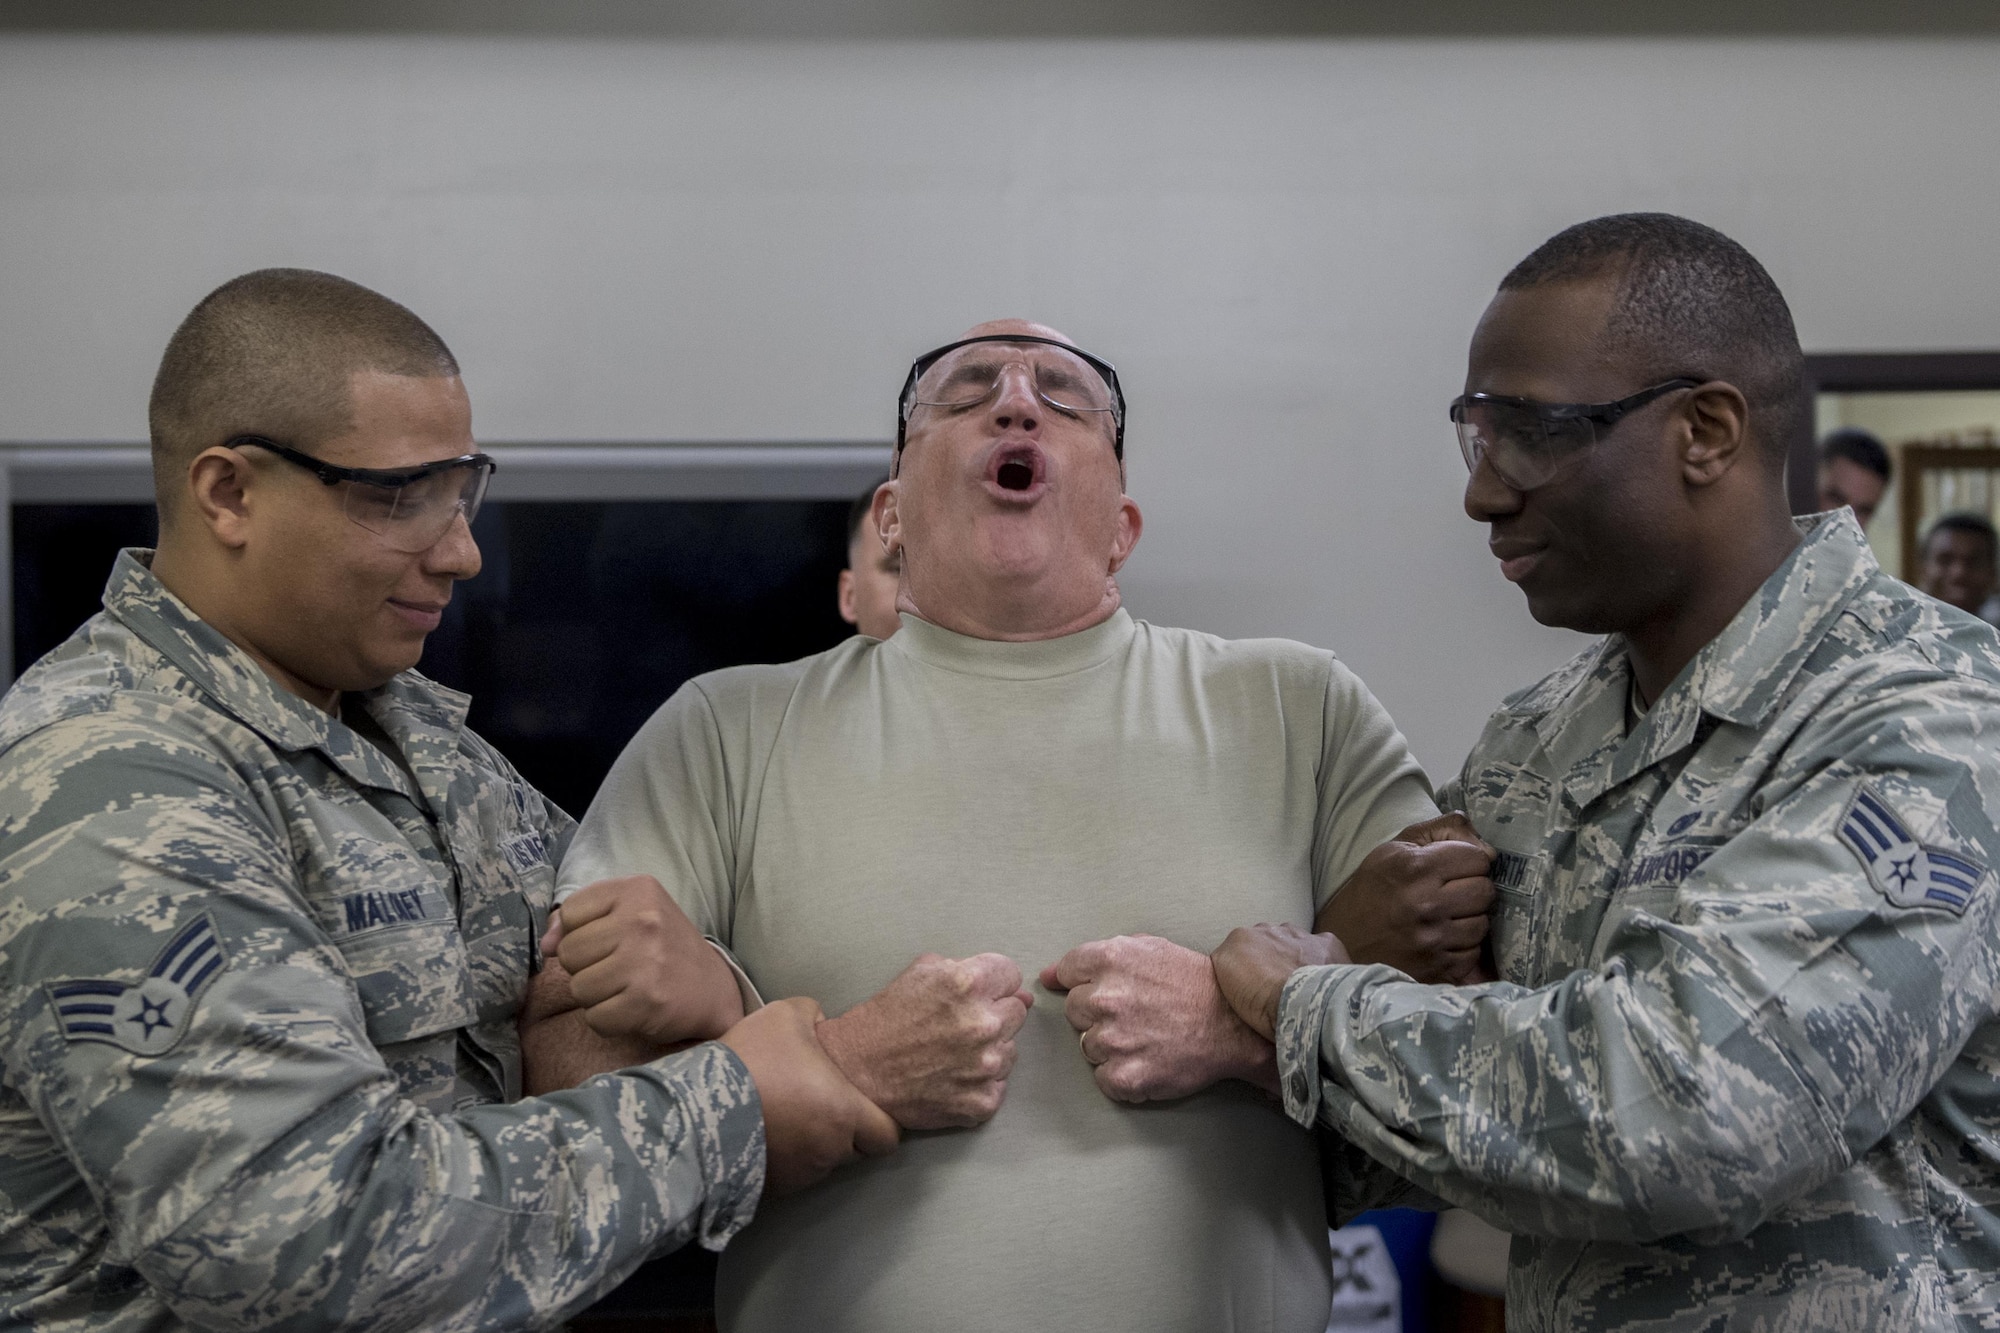 Col. Kenneth Moss, 374th Airlift Wing commander, reacts to getting tased during a 374th Security Forces Squadron less-lethal weapons demonstration March 15, 2017, at Yokota Air Base, Japan. Moss volunteered to be part of the demonstration to experience and understand more of what SFS members go through and to show his support. (U.S. Air Force photo by Airman 1st Class Donald Hudson)